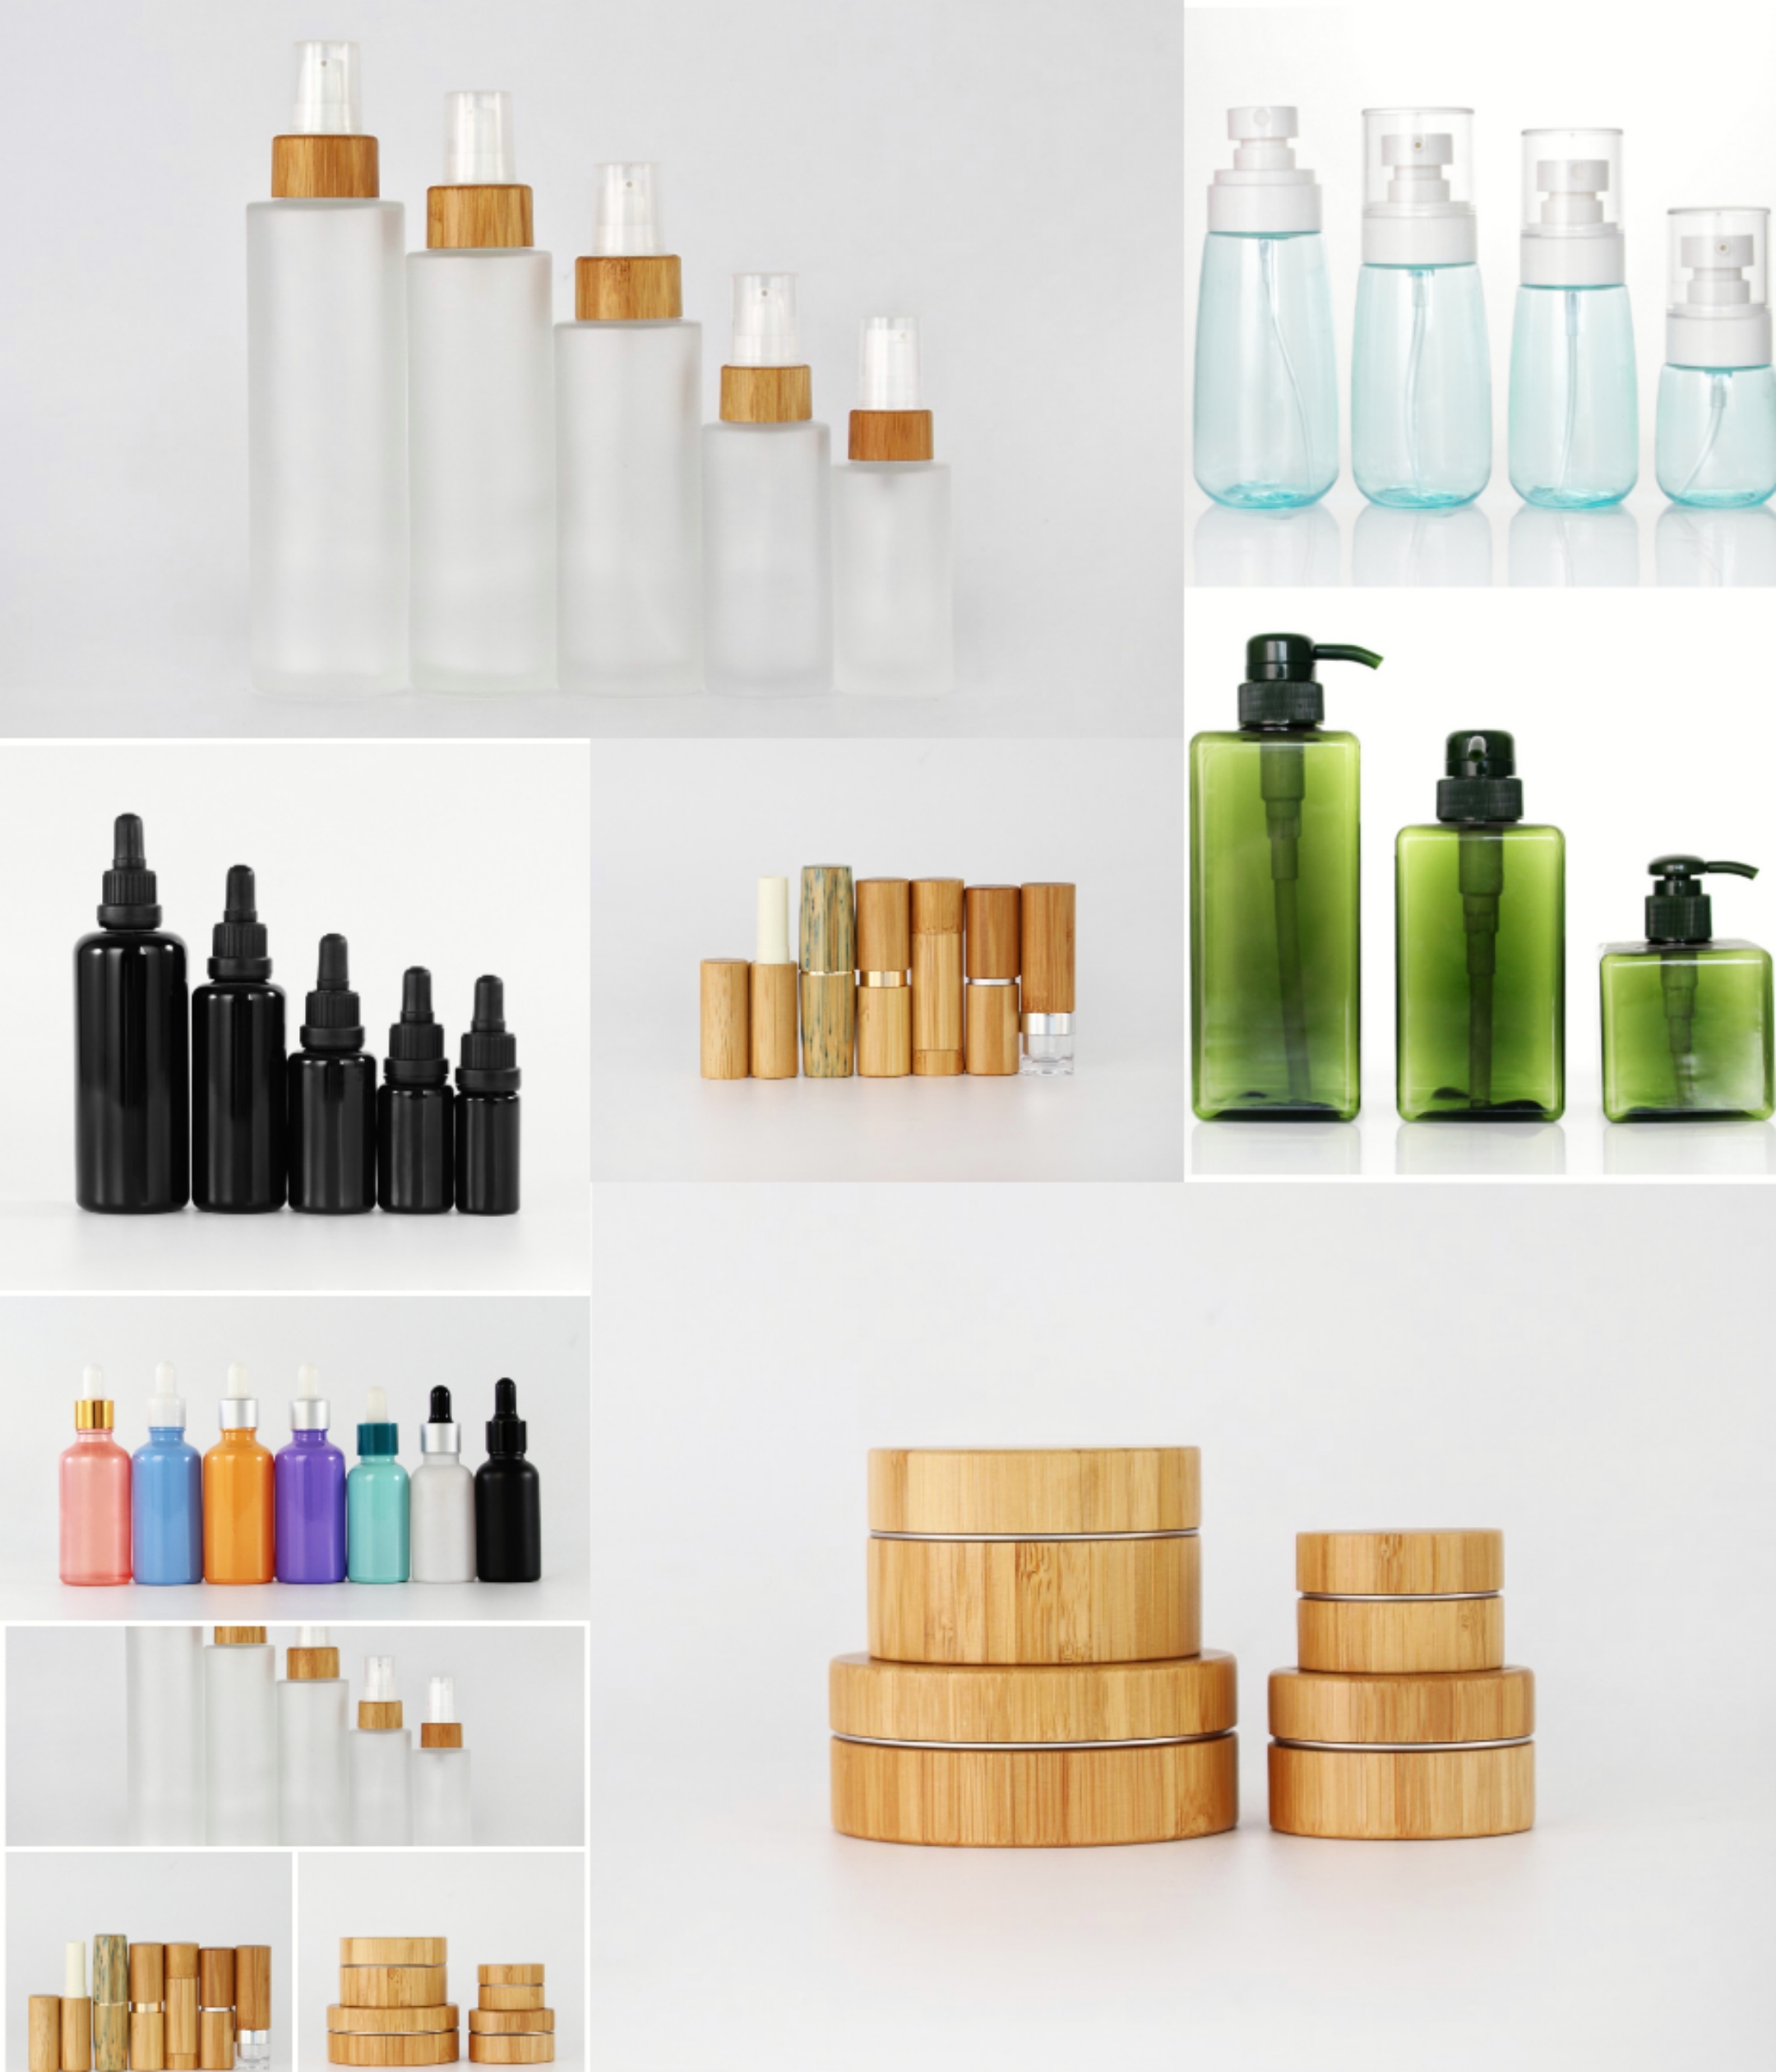 Influence of the current international situation on the cosmetic packaging industry